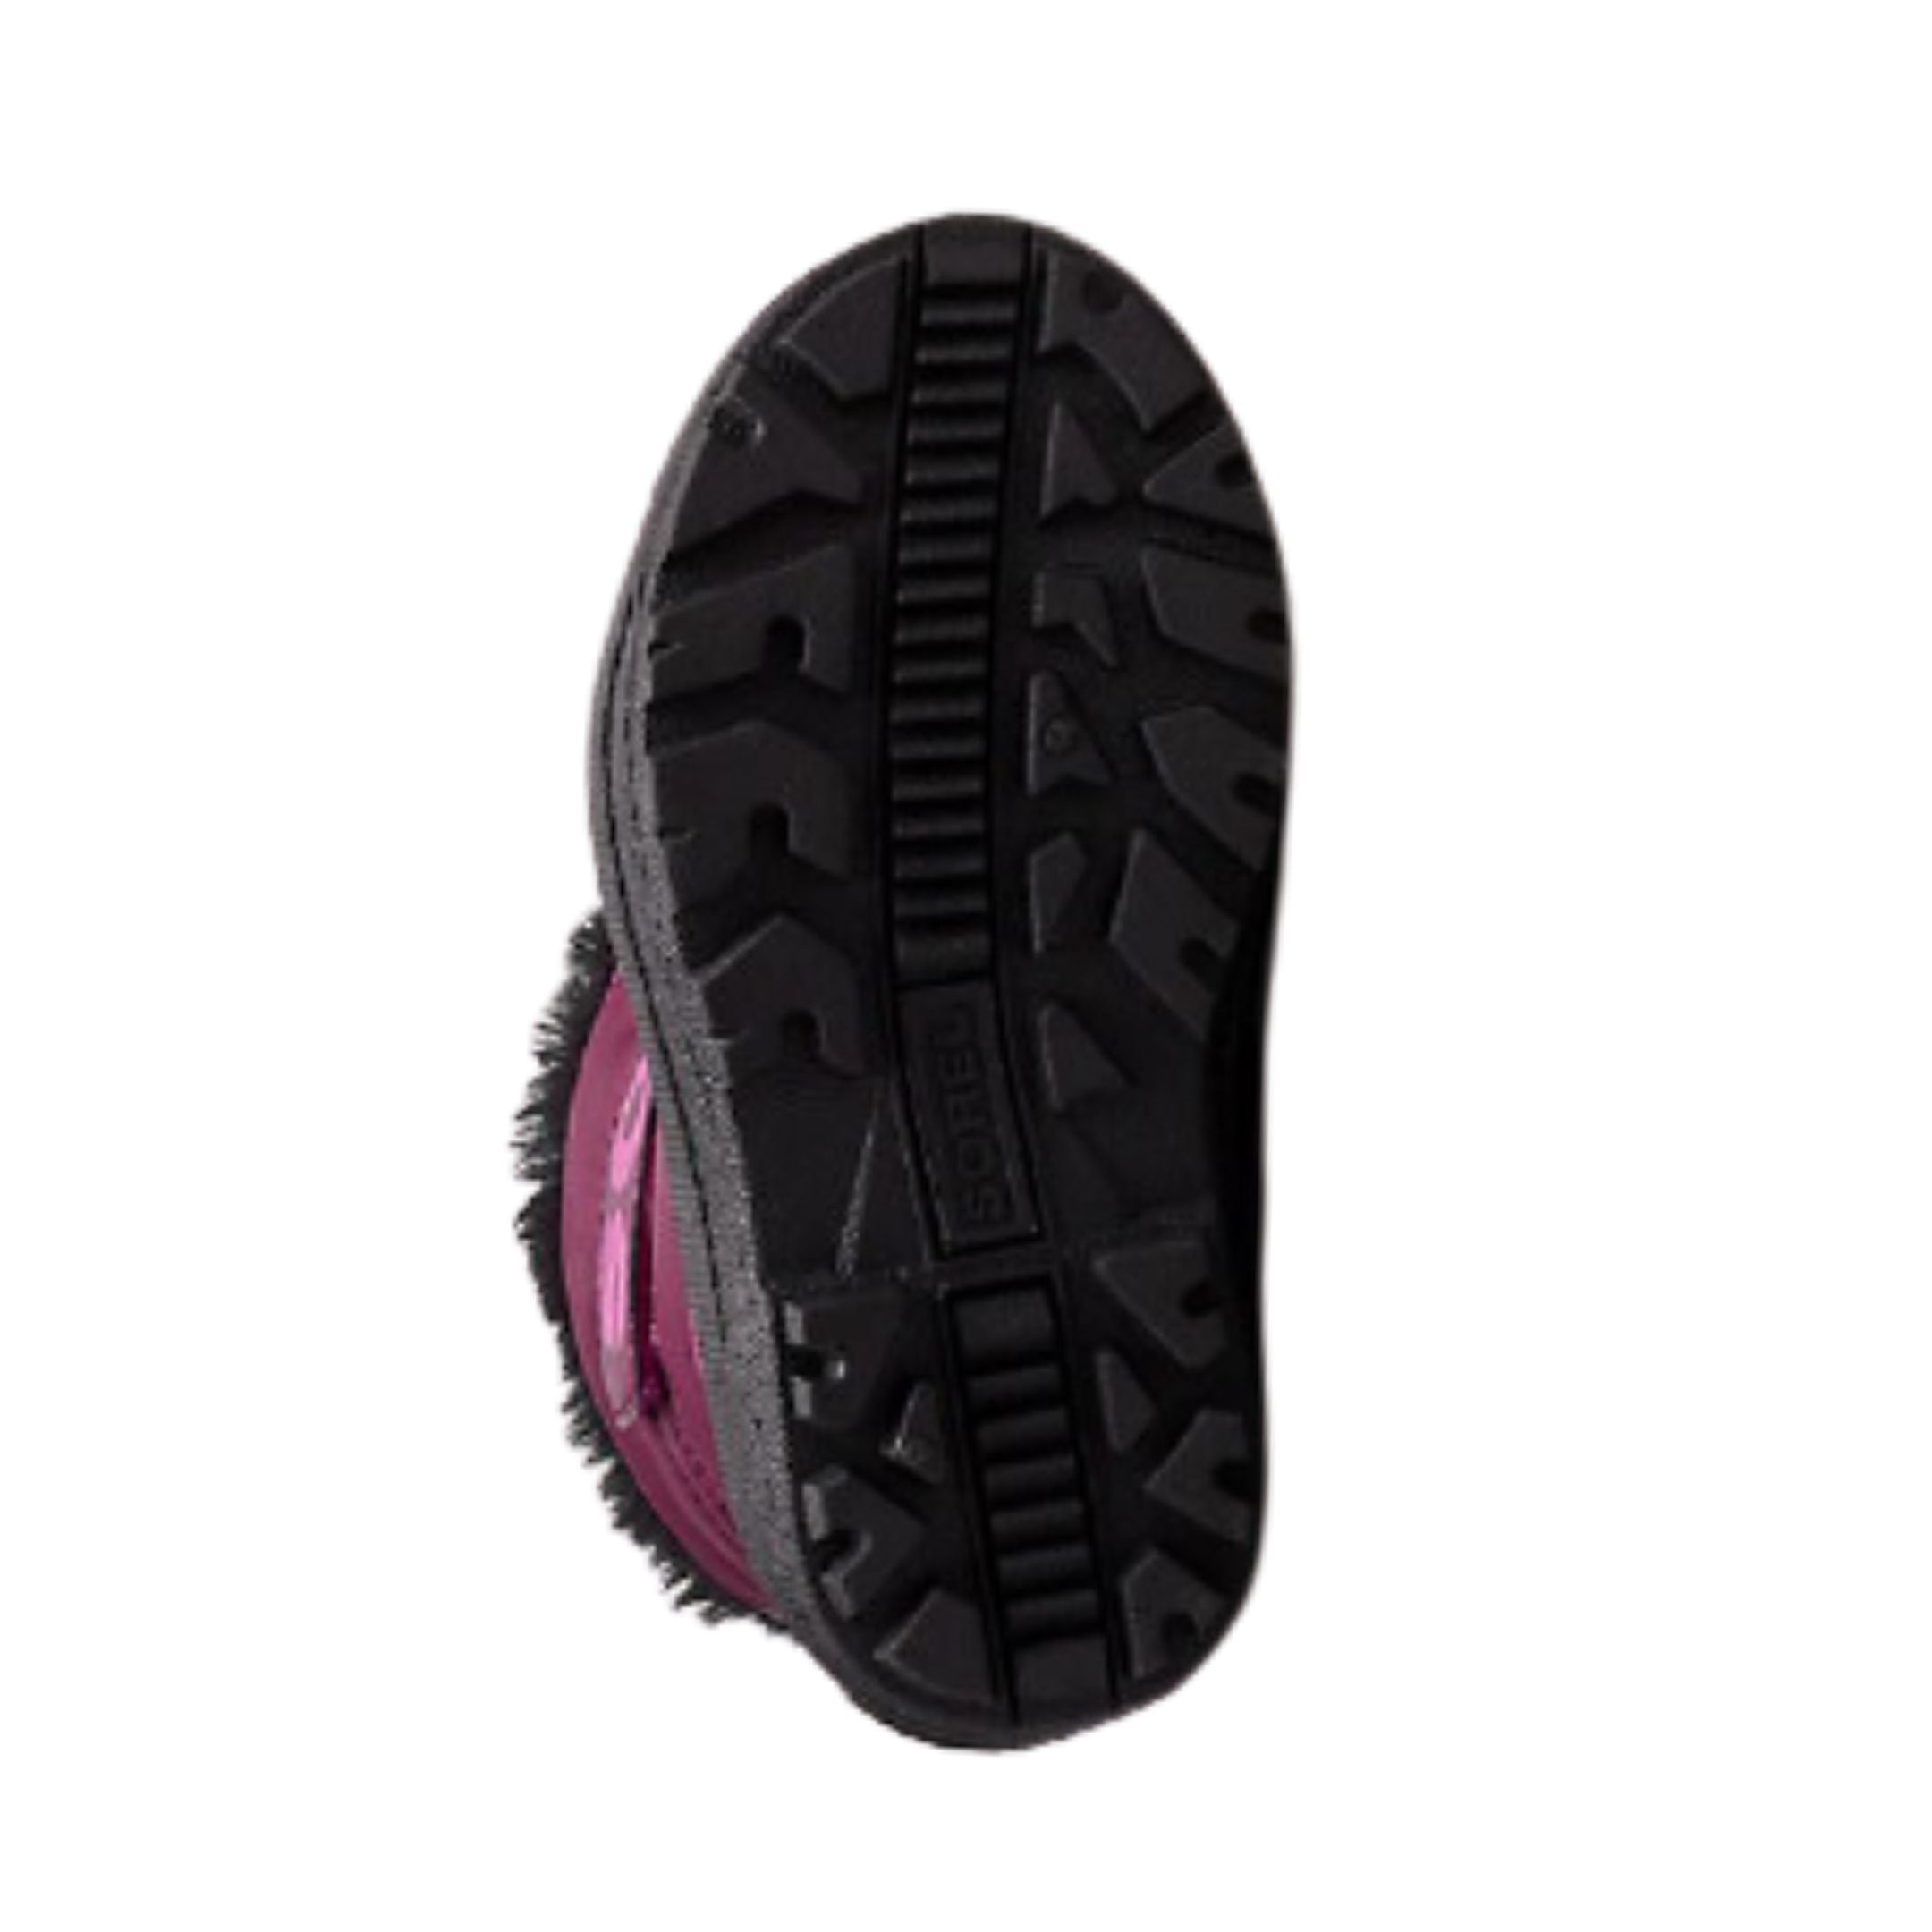 Black outsole with grip of Sorel Snow Commander winter boot